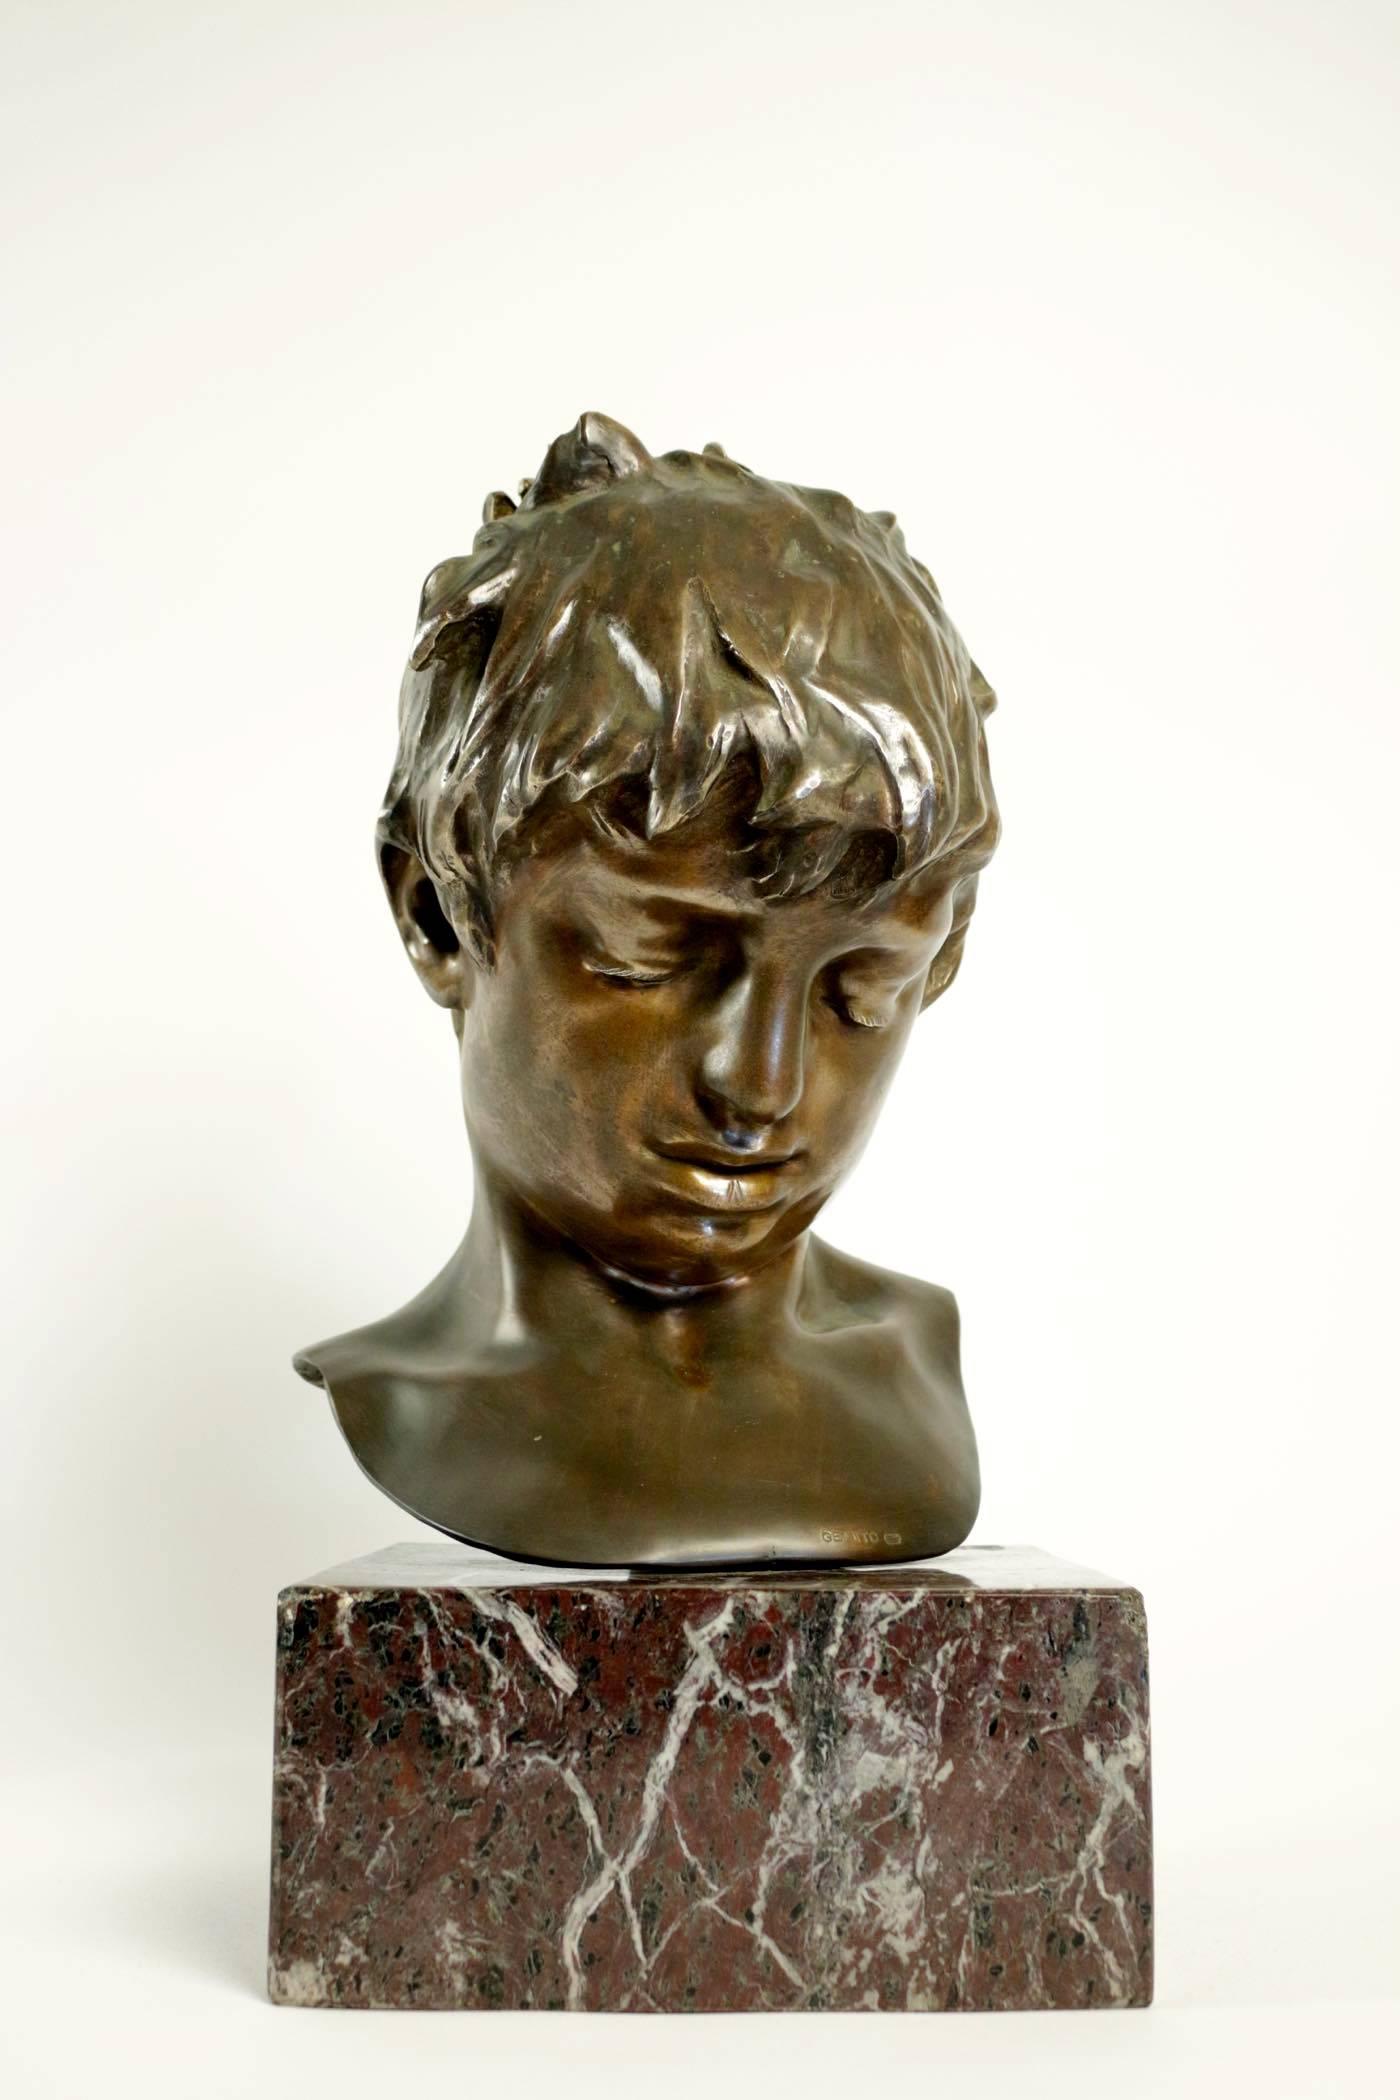 1880s Bronze head of a Sicilian adolescent boy set on a marble base, signed by Vincenzo Gemito (1852-1929).
Artist can be looked up on the Be´ne´zit refererence book.
Some of this artist's works are exhibited at the Musee d'Orsay in